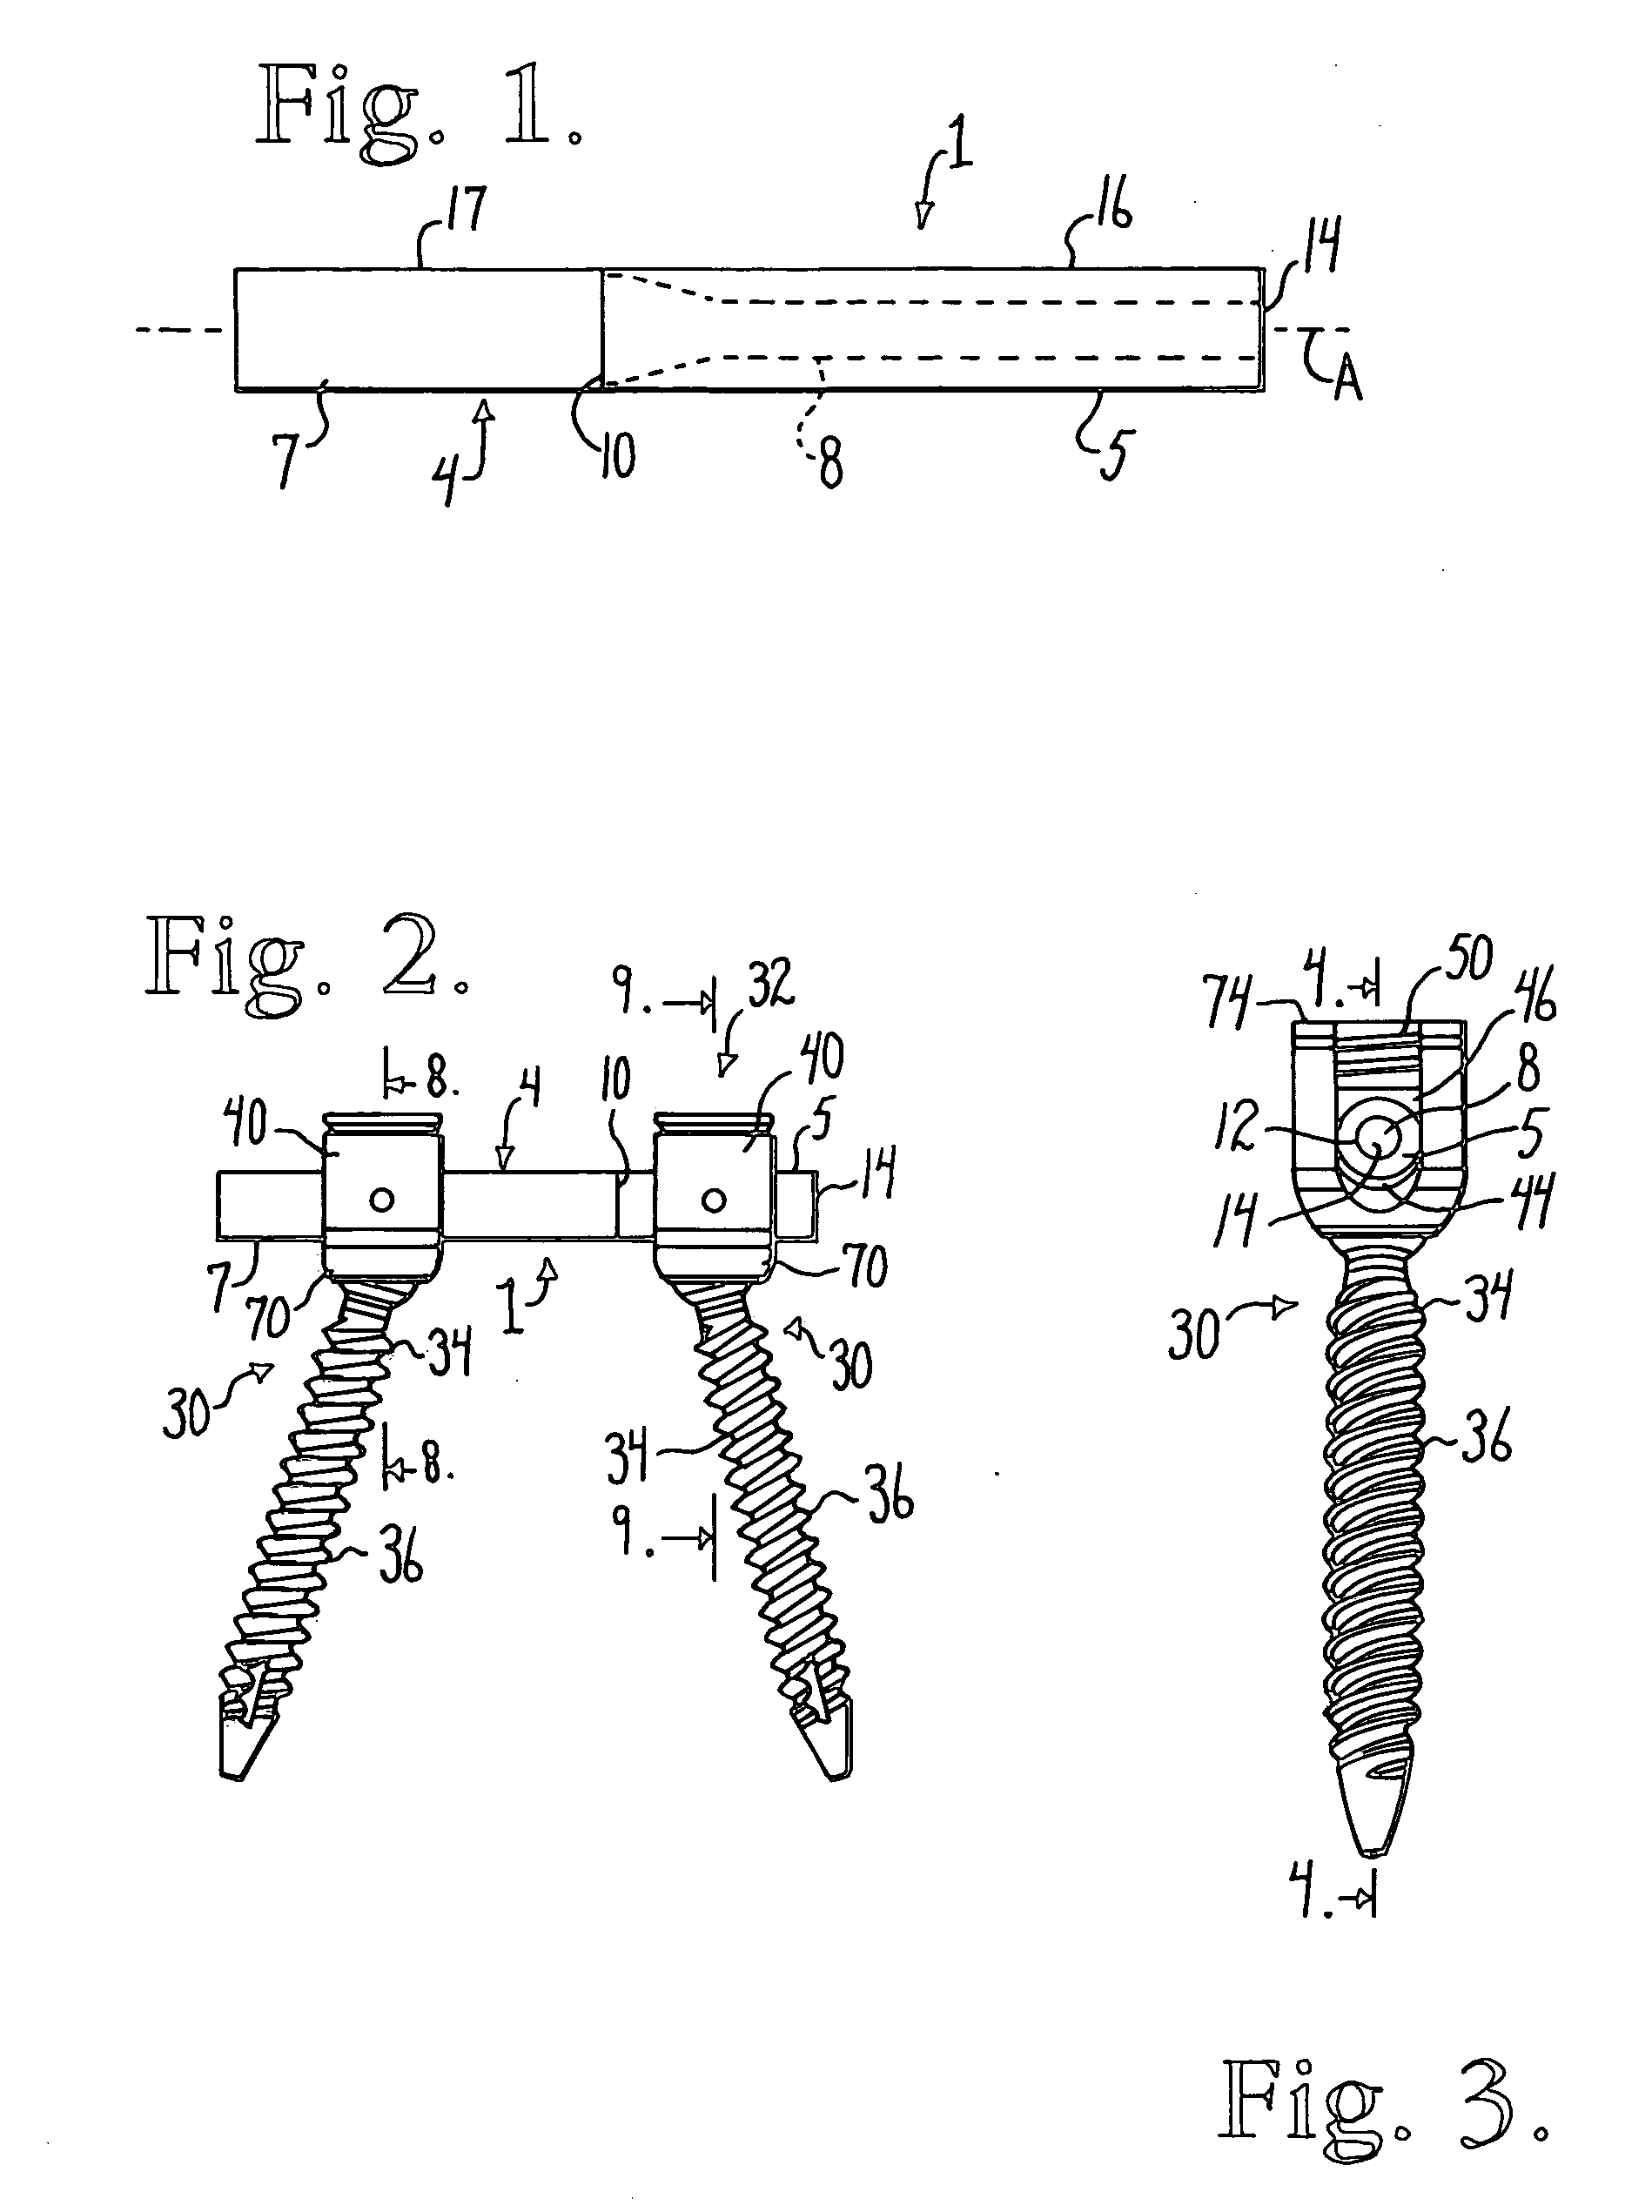 Elastic covered dynamic stabilization connector and assembly